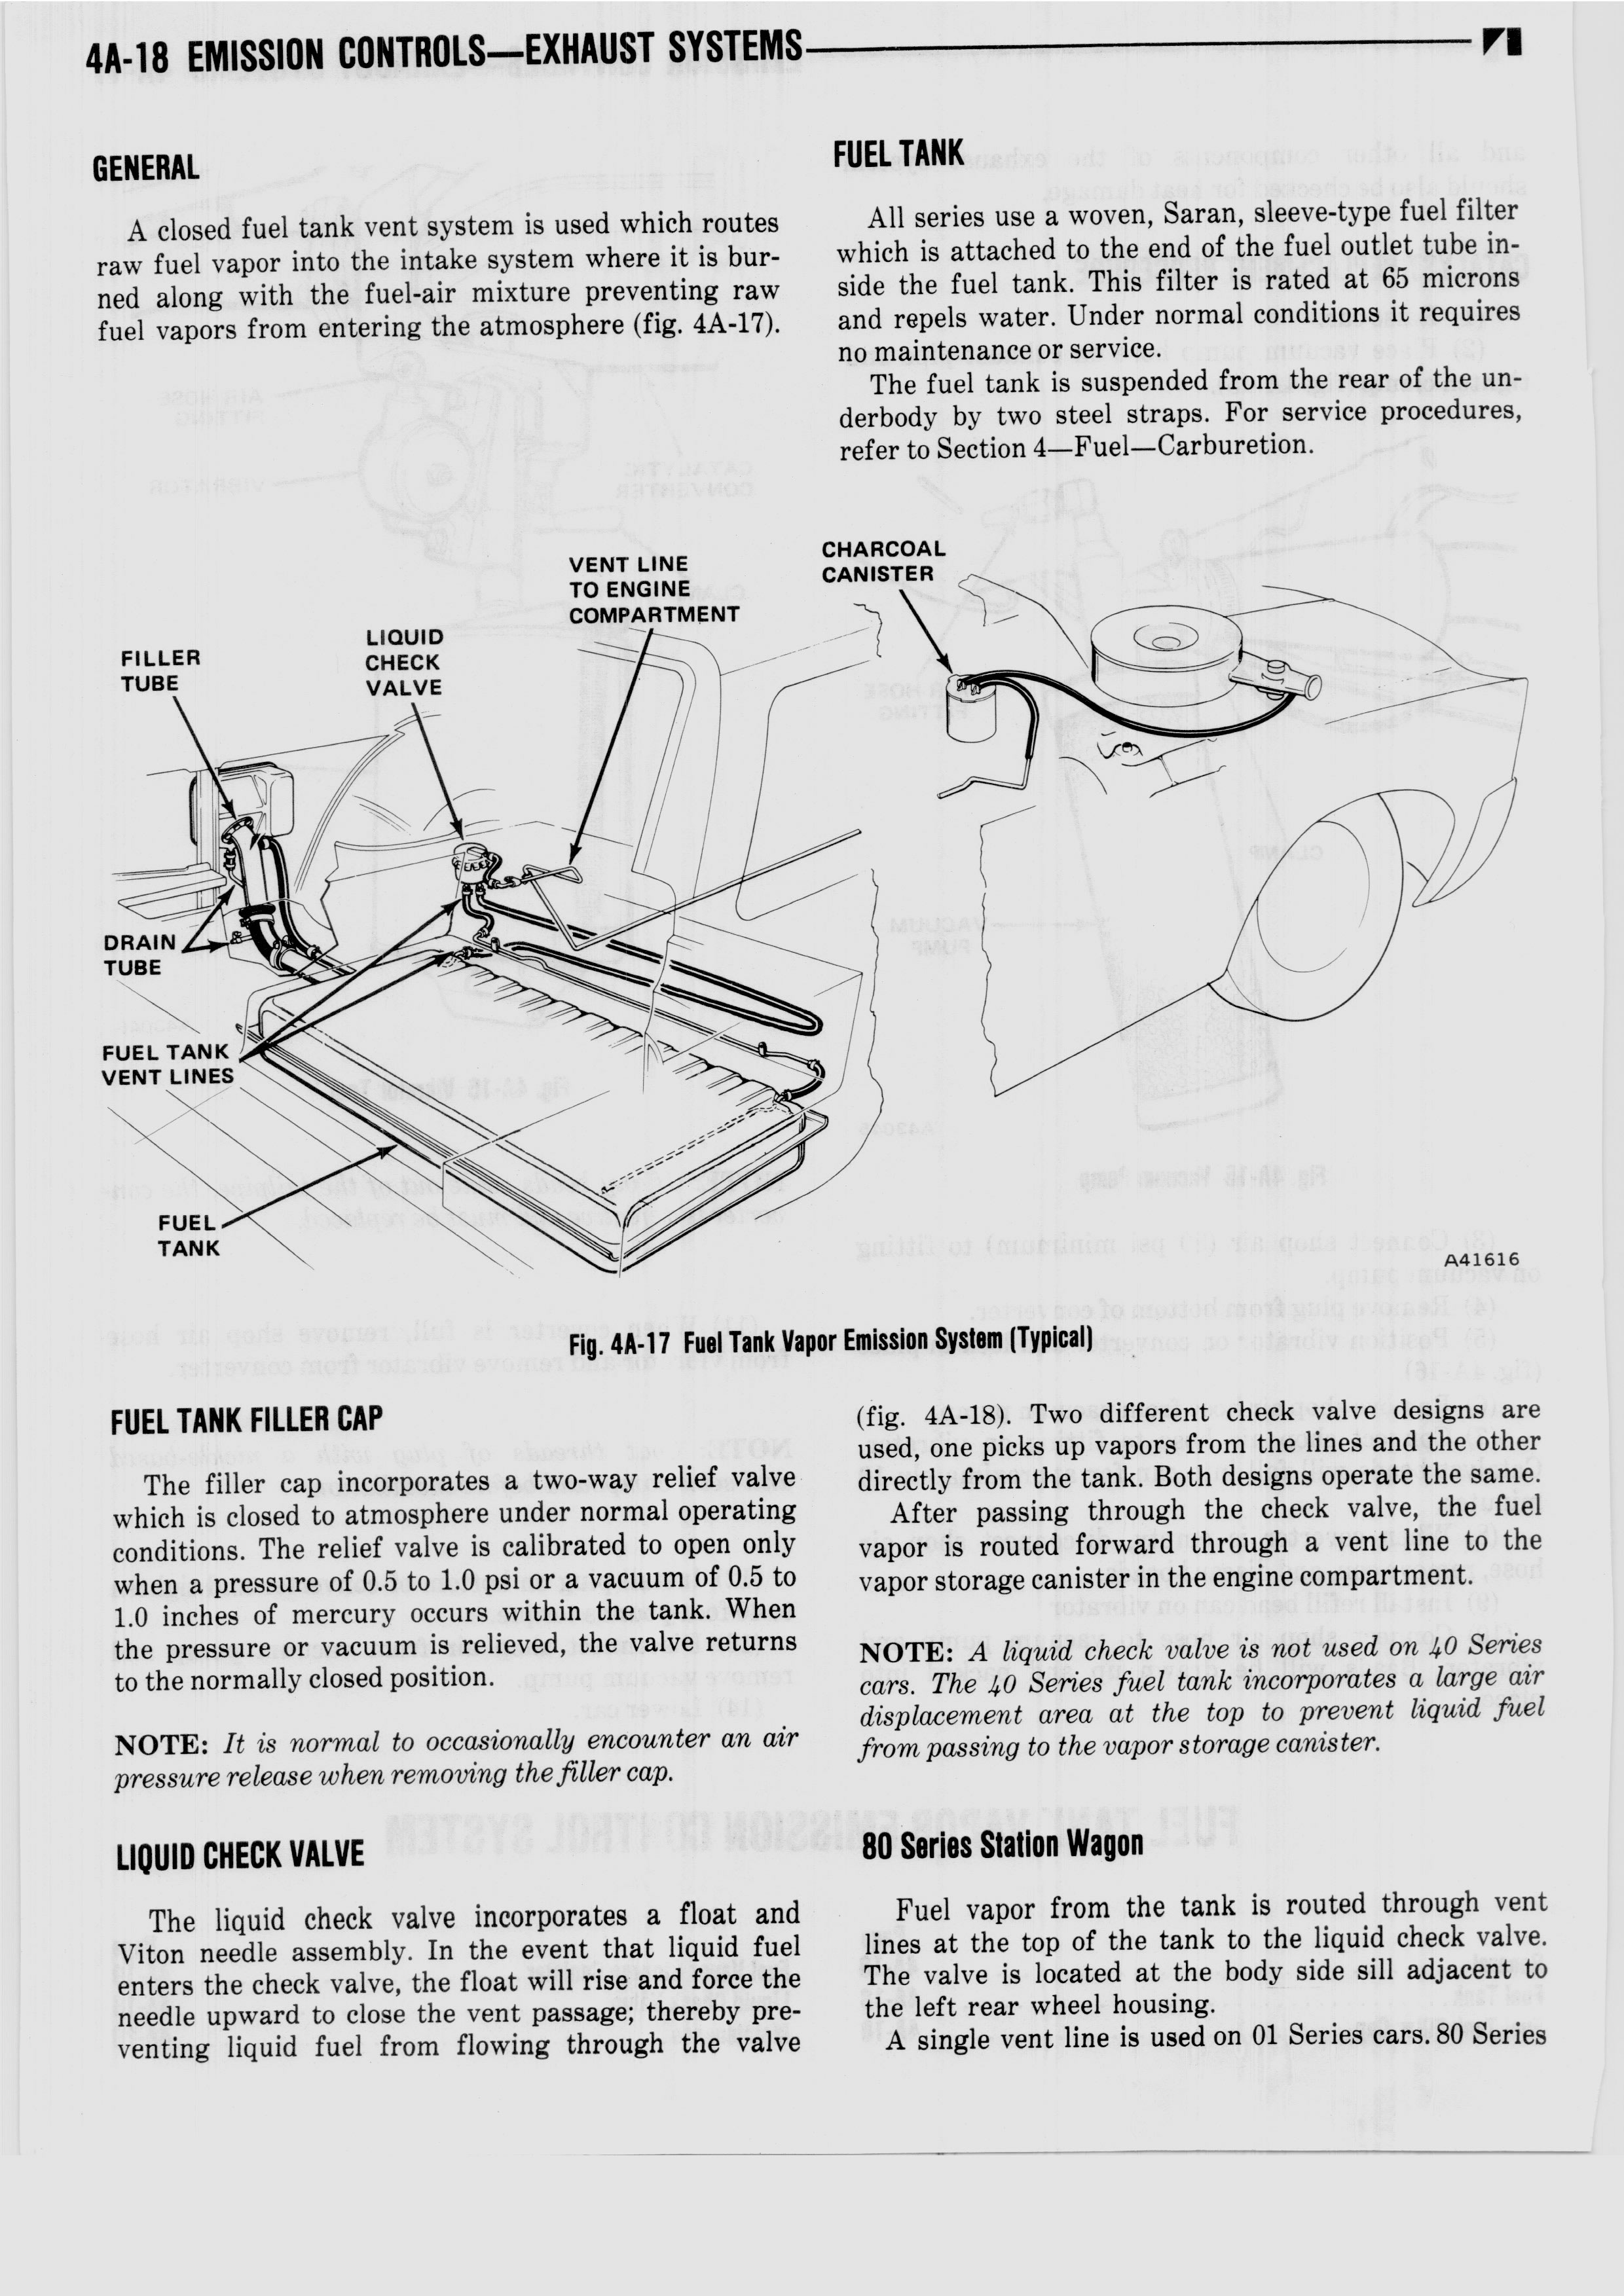 4A Emission Controls - Exhaust Systems / 1976 AMC Technical Service